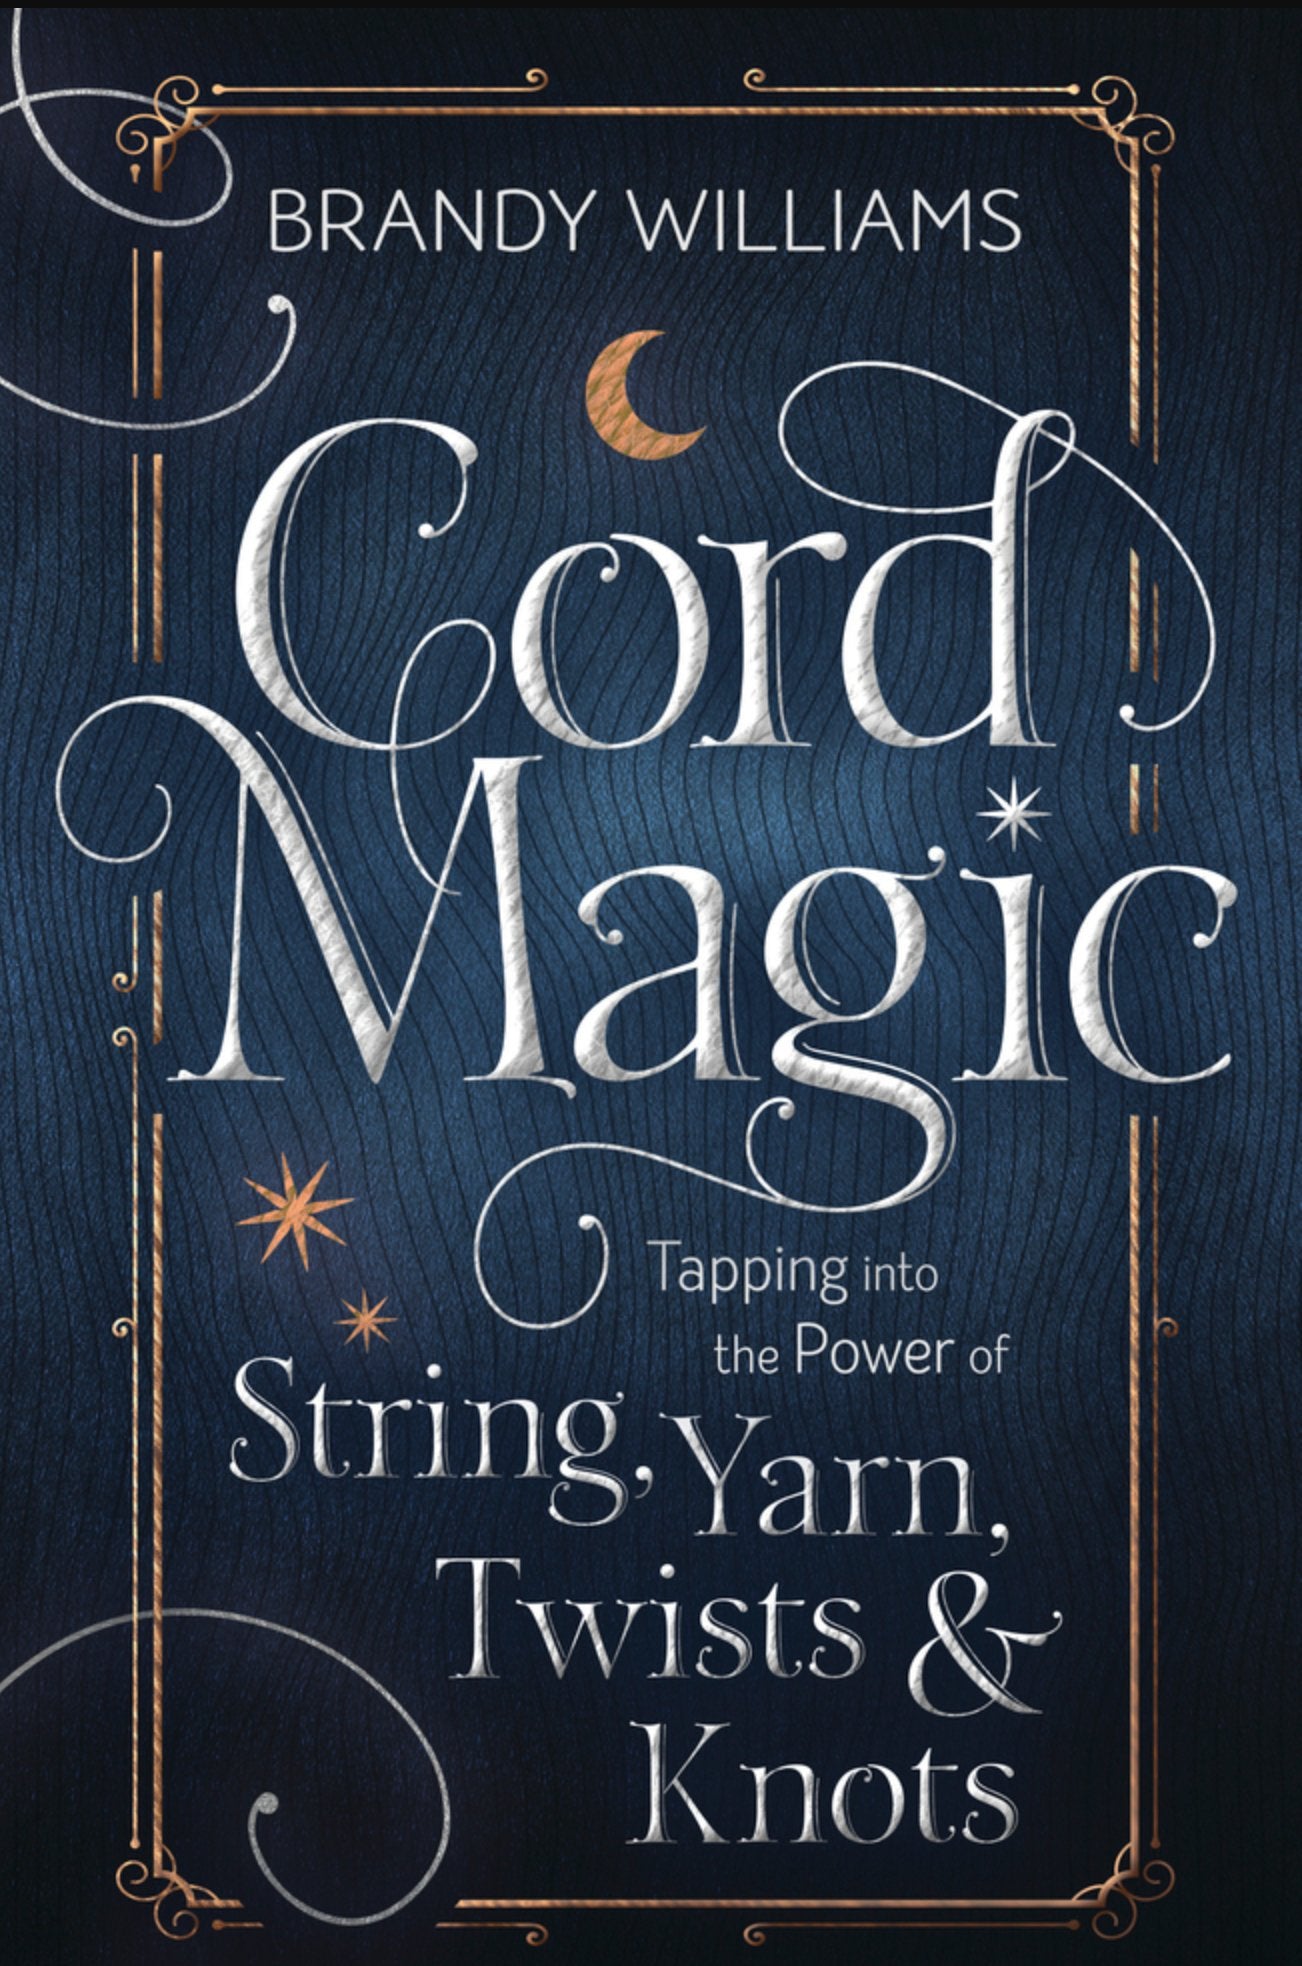 Cord Magic | Tapping into the Power of String, Yarn, Twists & Knots - Spiral Circle